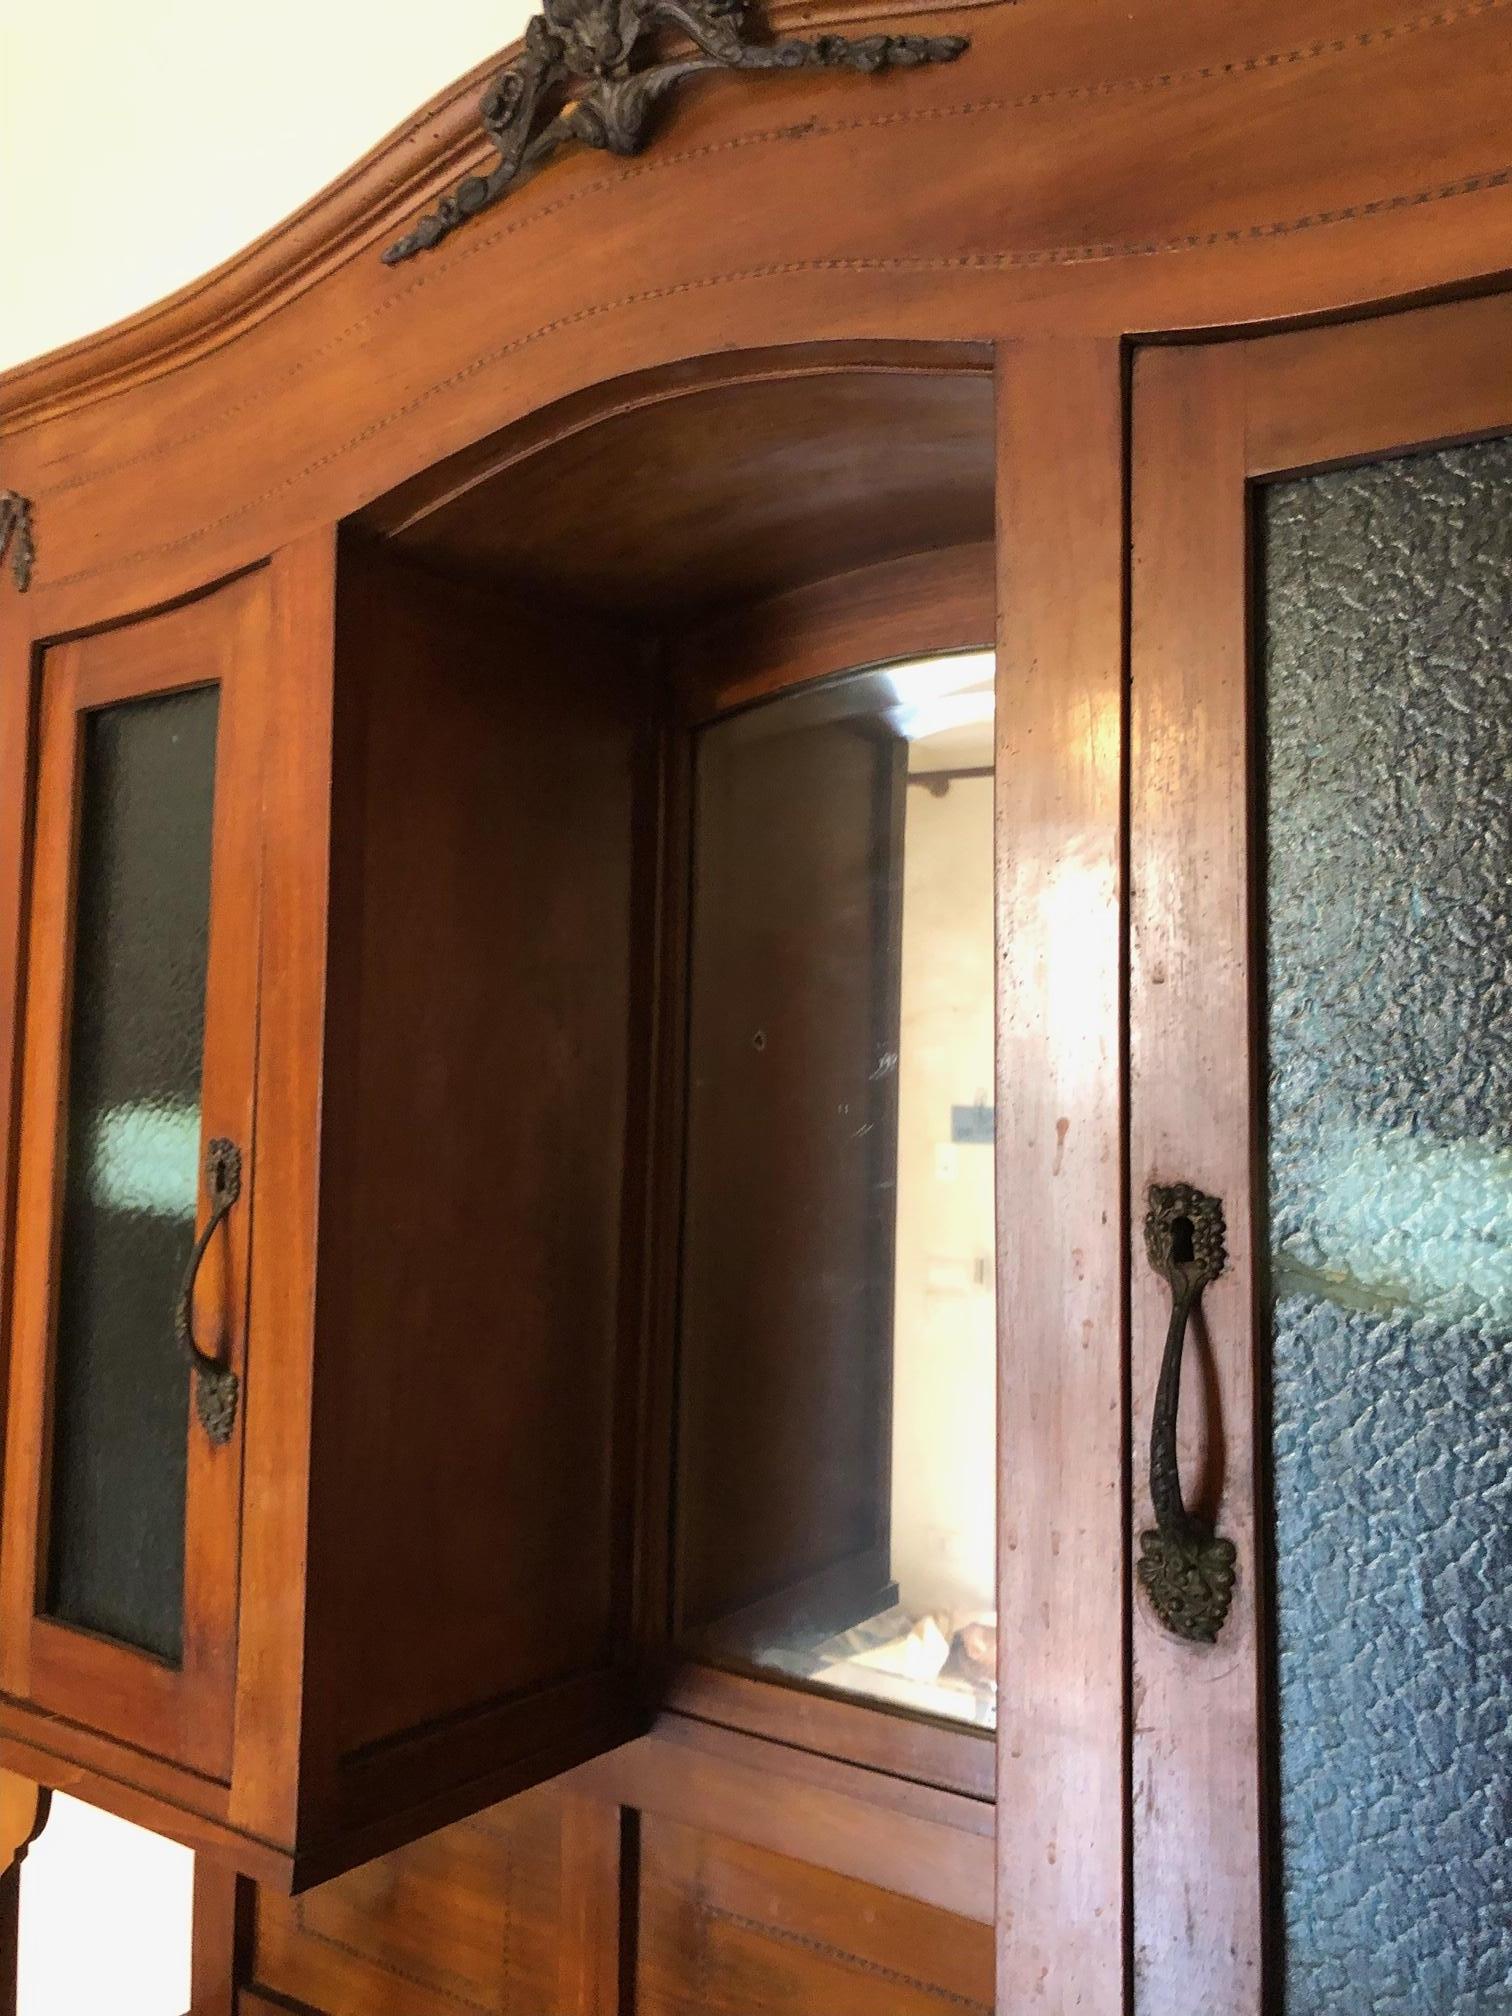 Cabinets Italian showcase in national walnut in natural color art deco style. 
The piece of furniture is divided into two parts, the upper one with glass and the lower one with drawers and doors with internal shelf.
Original handles. 
All parts